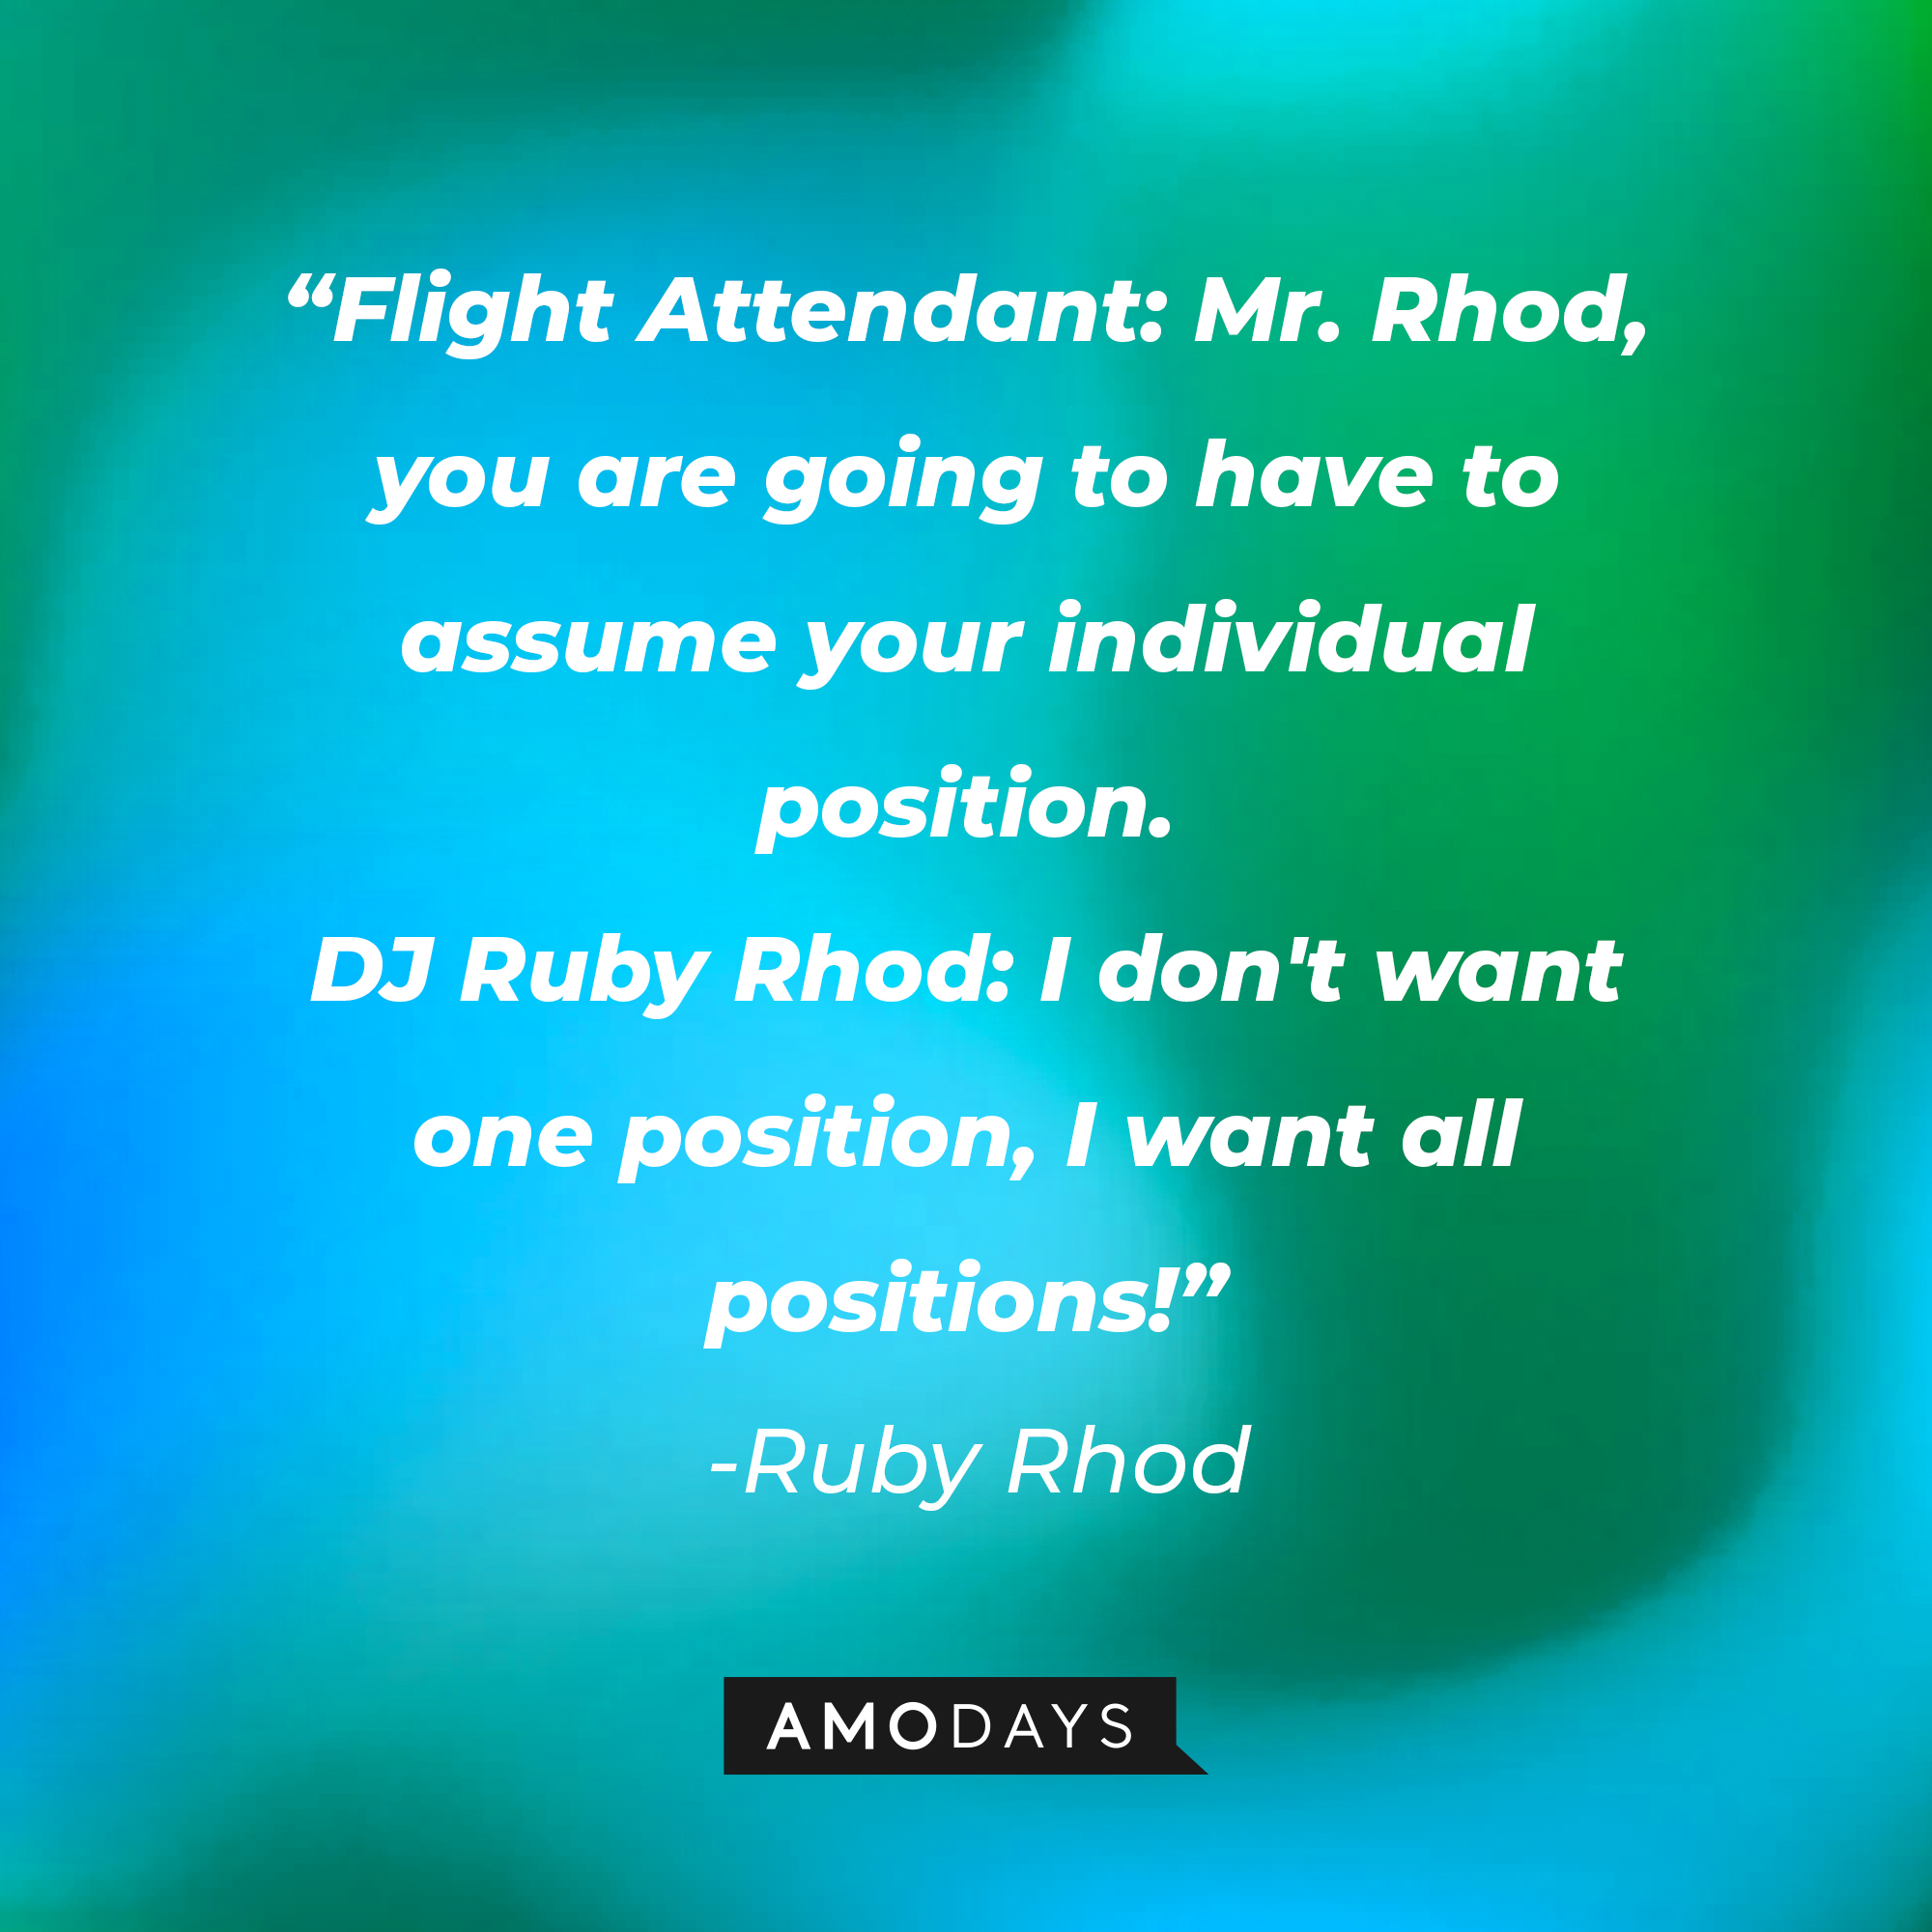 A photo with the quote, "Flight Attendant: Mr. Rhod, you are going to have to assume your individual position. DJ Ruby Rhod: I don't want one position, I want all positions!" | Source: Amodays